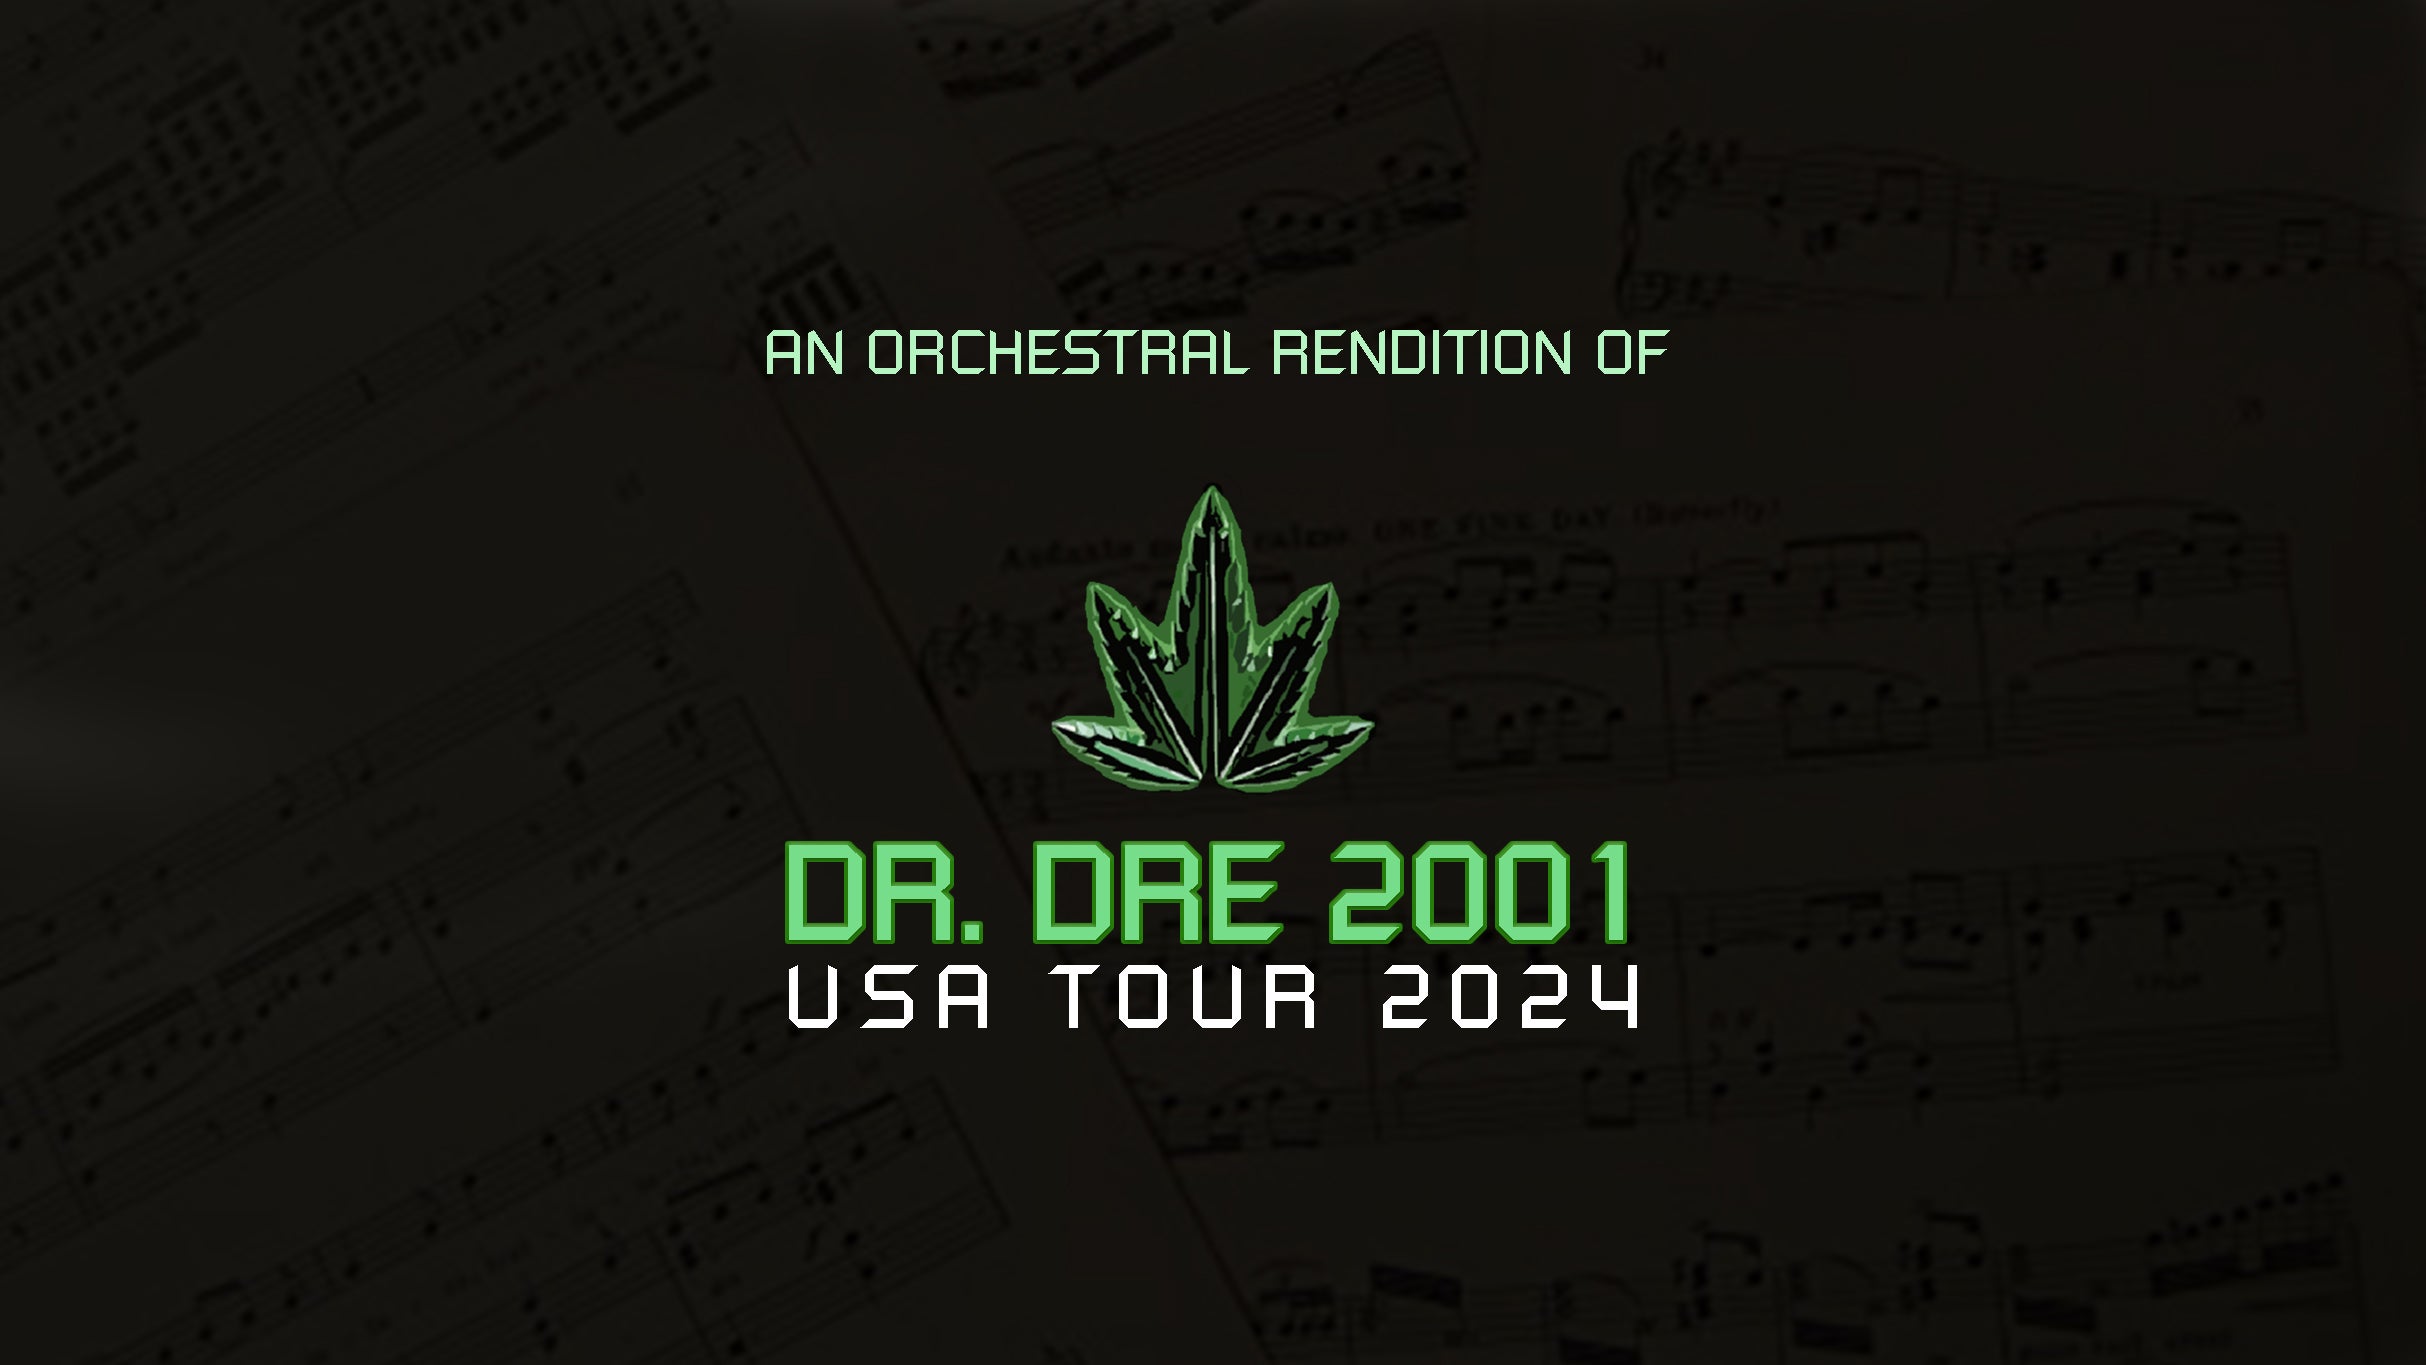 An Orchestral Rendition of Dr Dre 2001 at Varsity Theater-MN